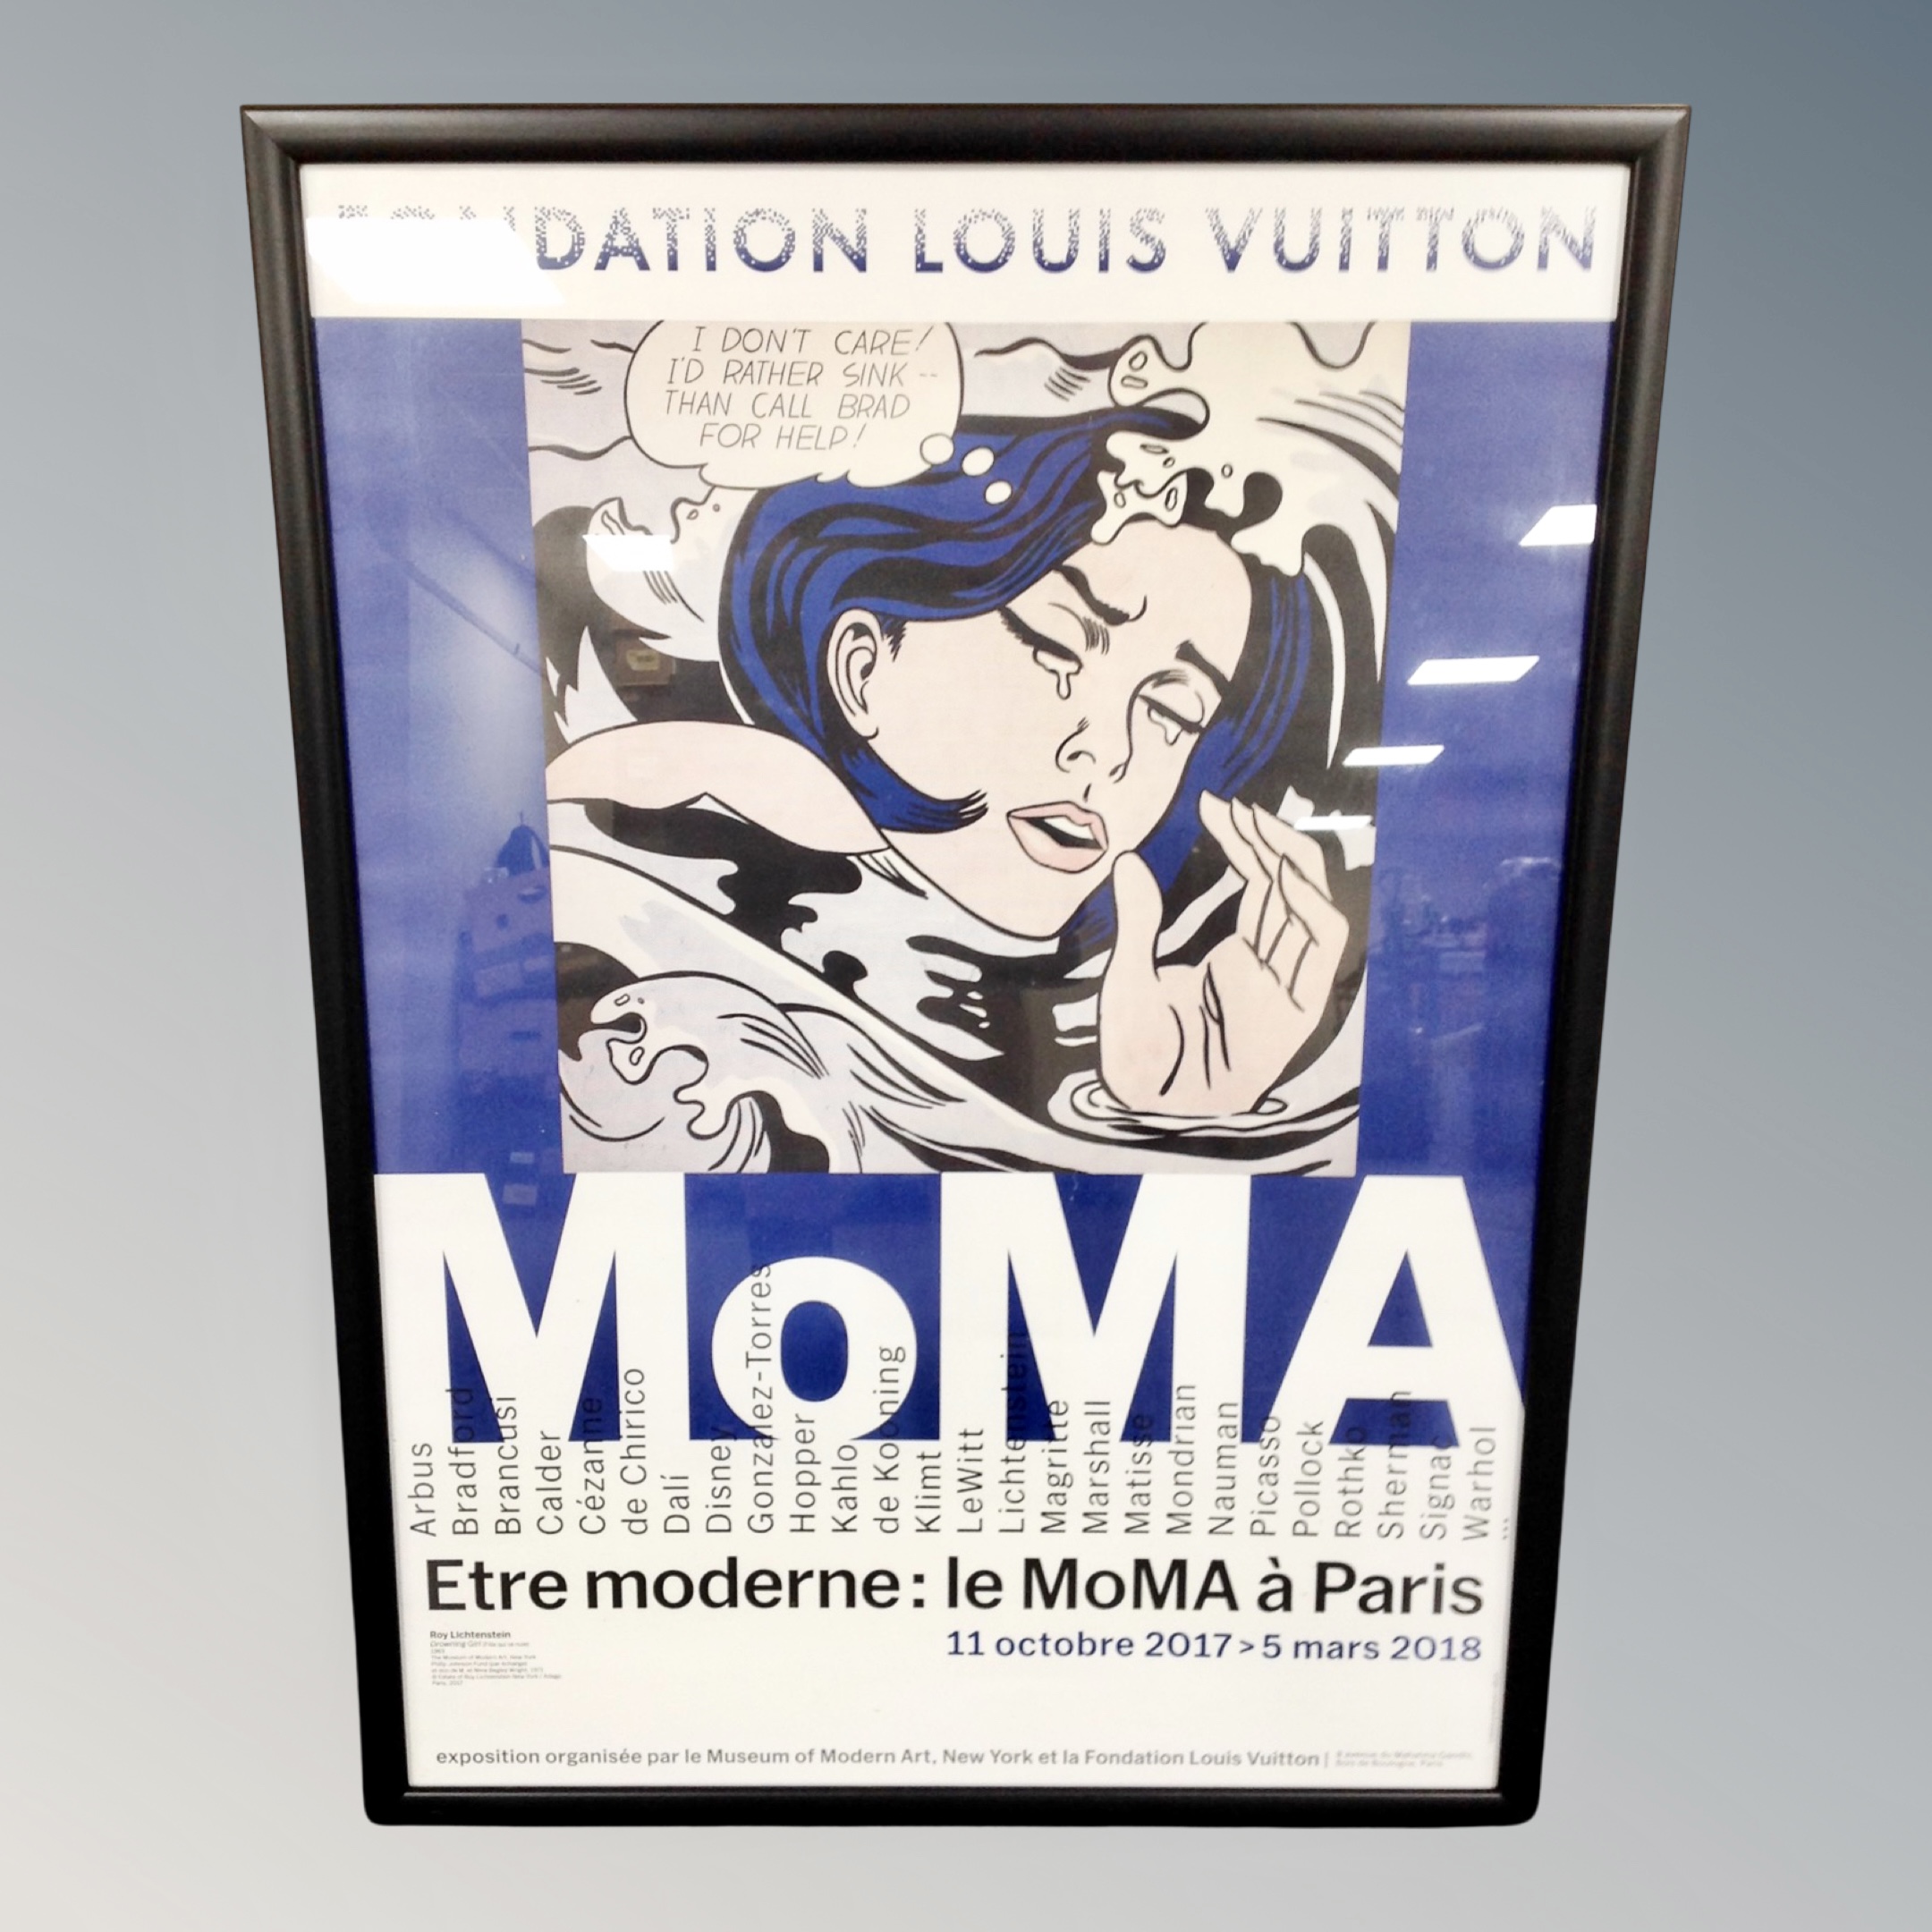 A Foundation Louis Vuitton MOMA Paris poster in frame